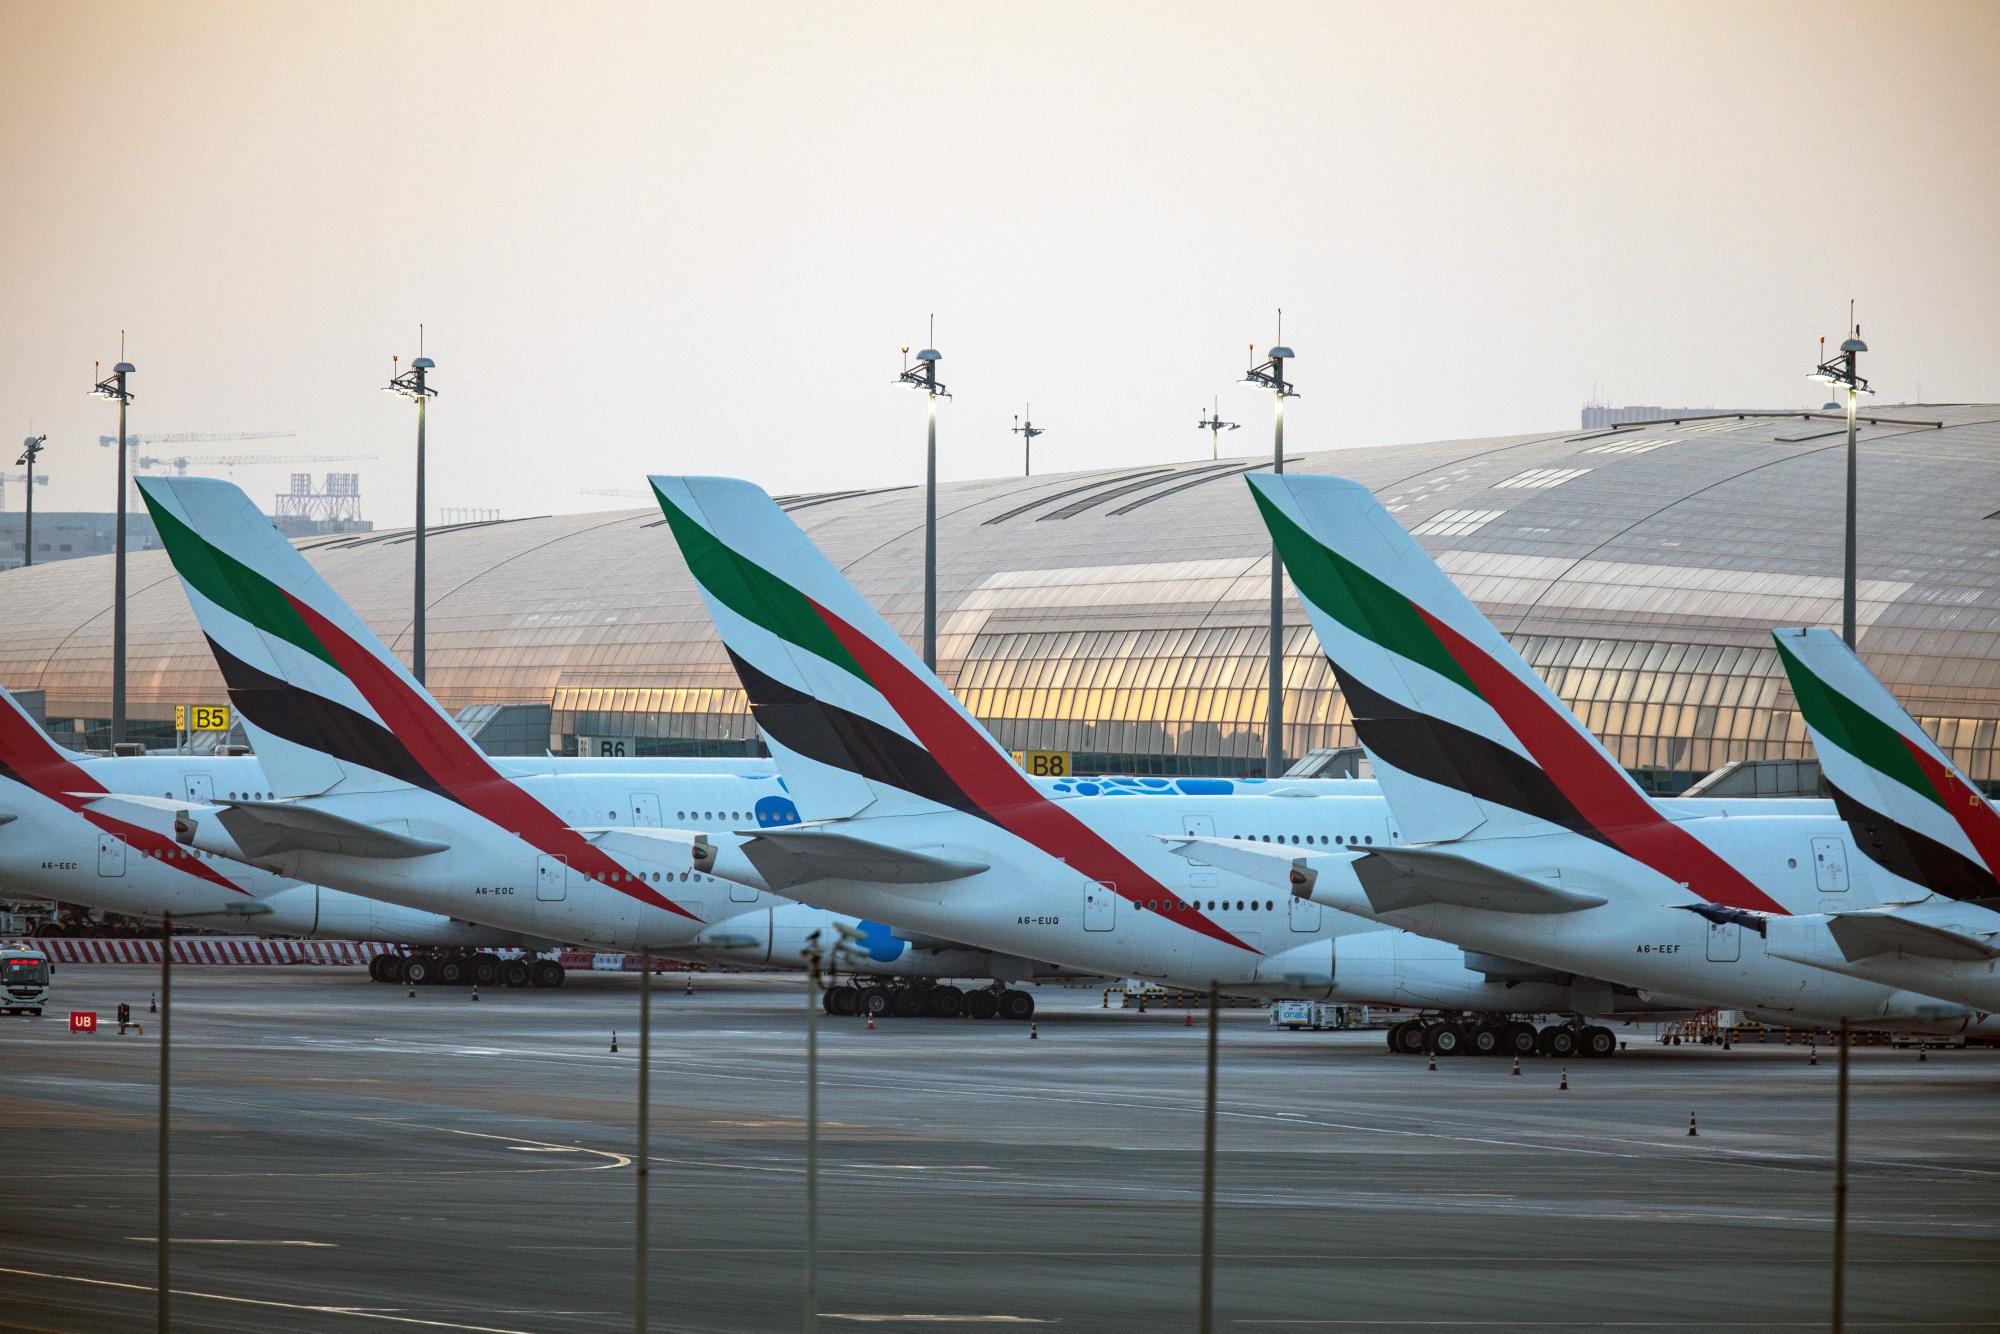 A line of passenger aircraft, operated by Emirates, stand beside the terminal building at Dubai International Airport in Dubai, on May 18.